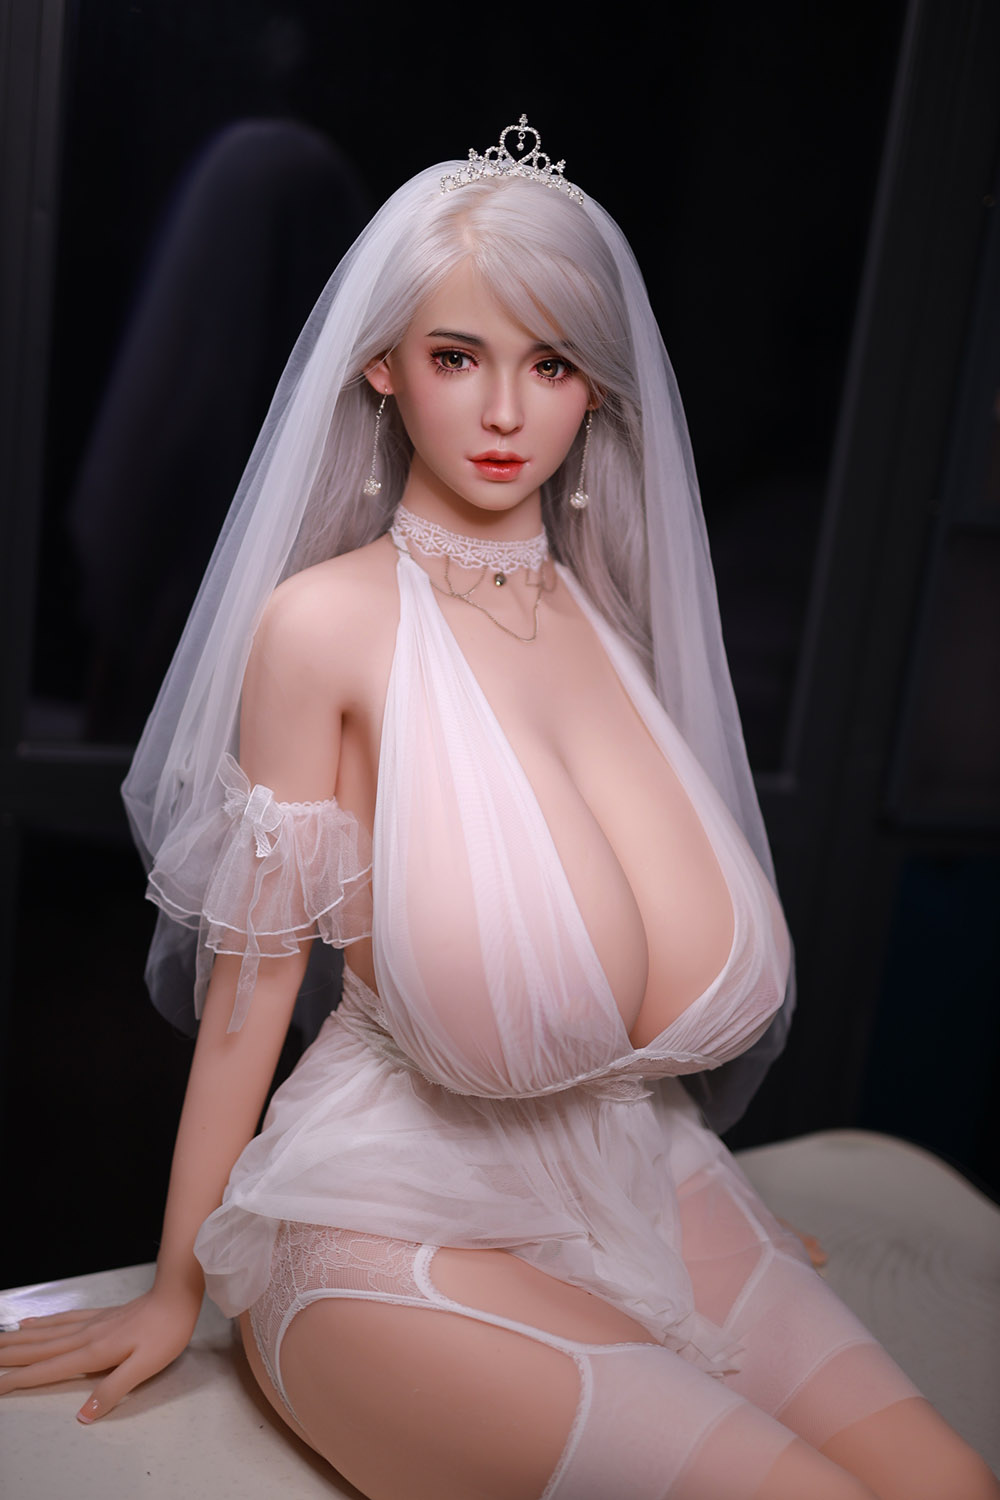 oversized breasts sex doll